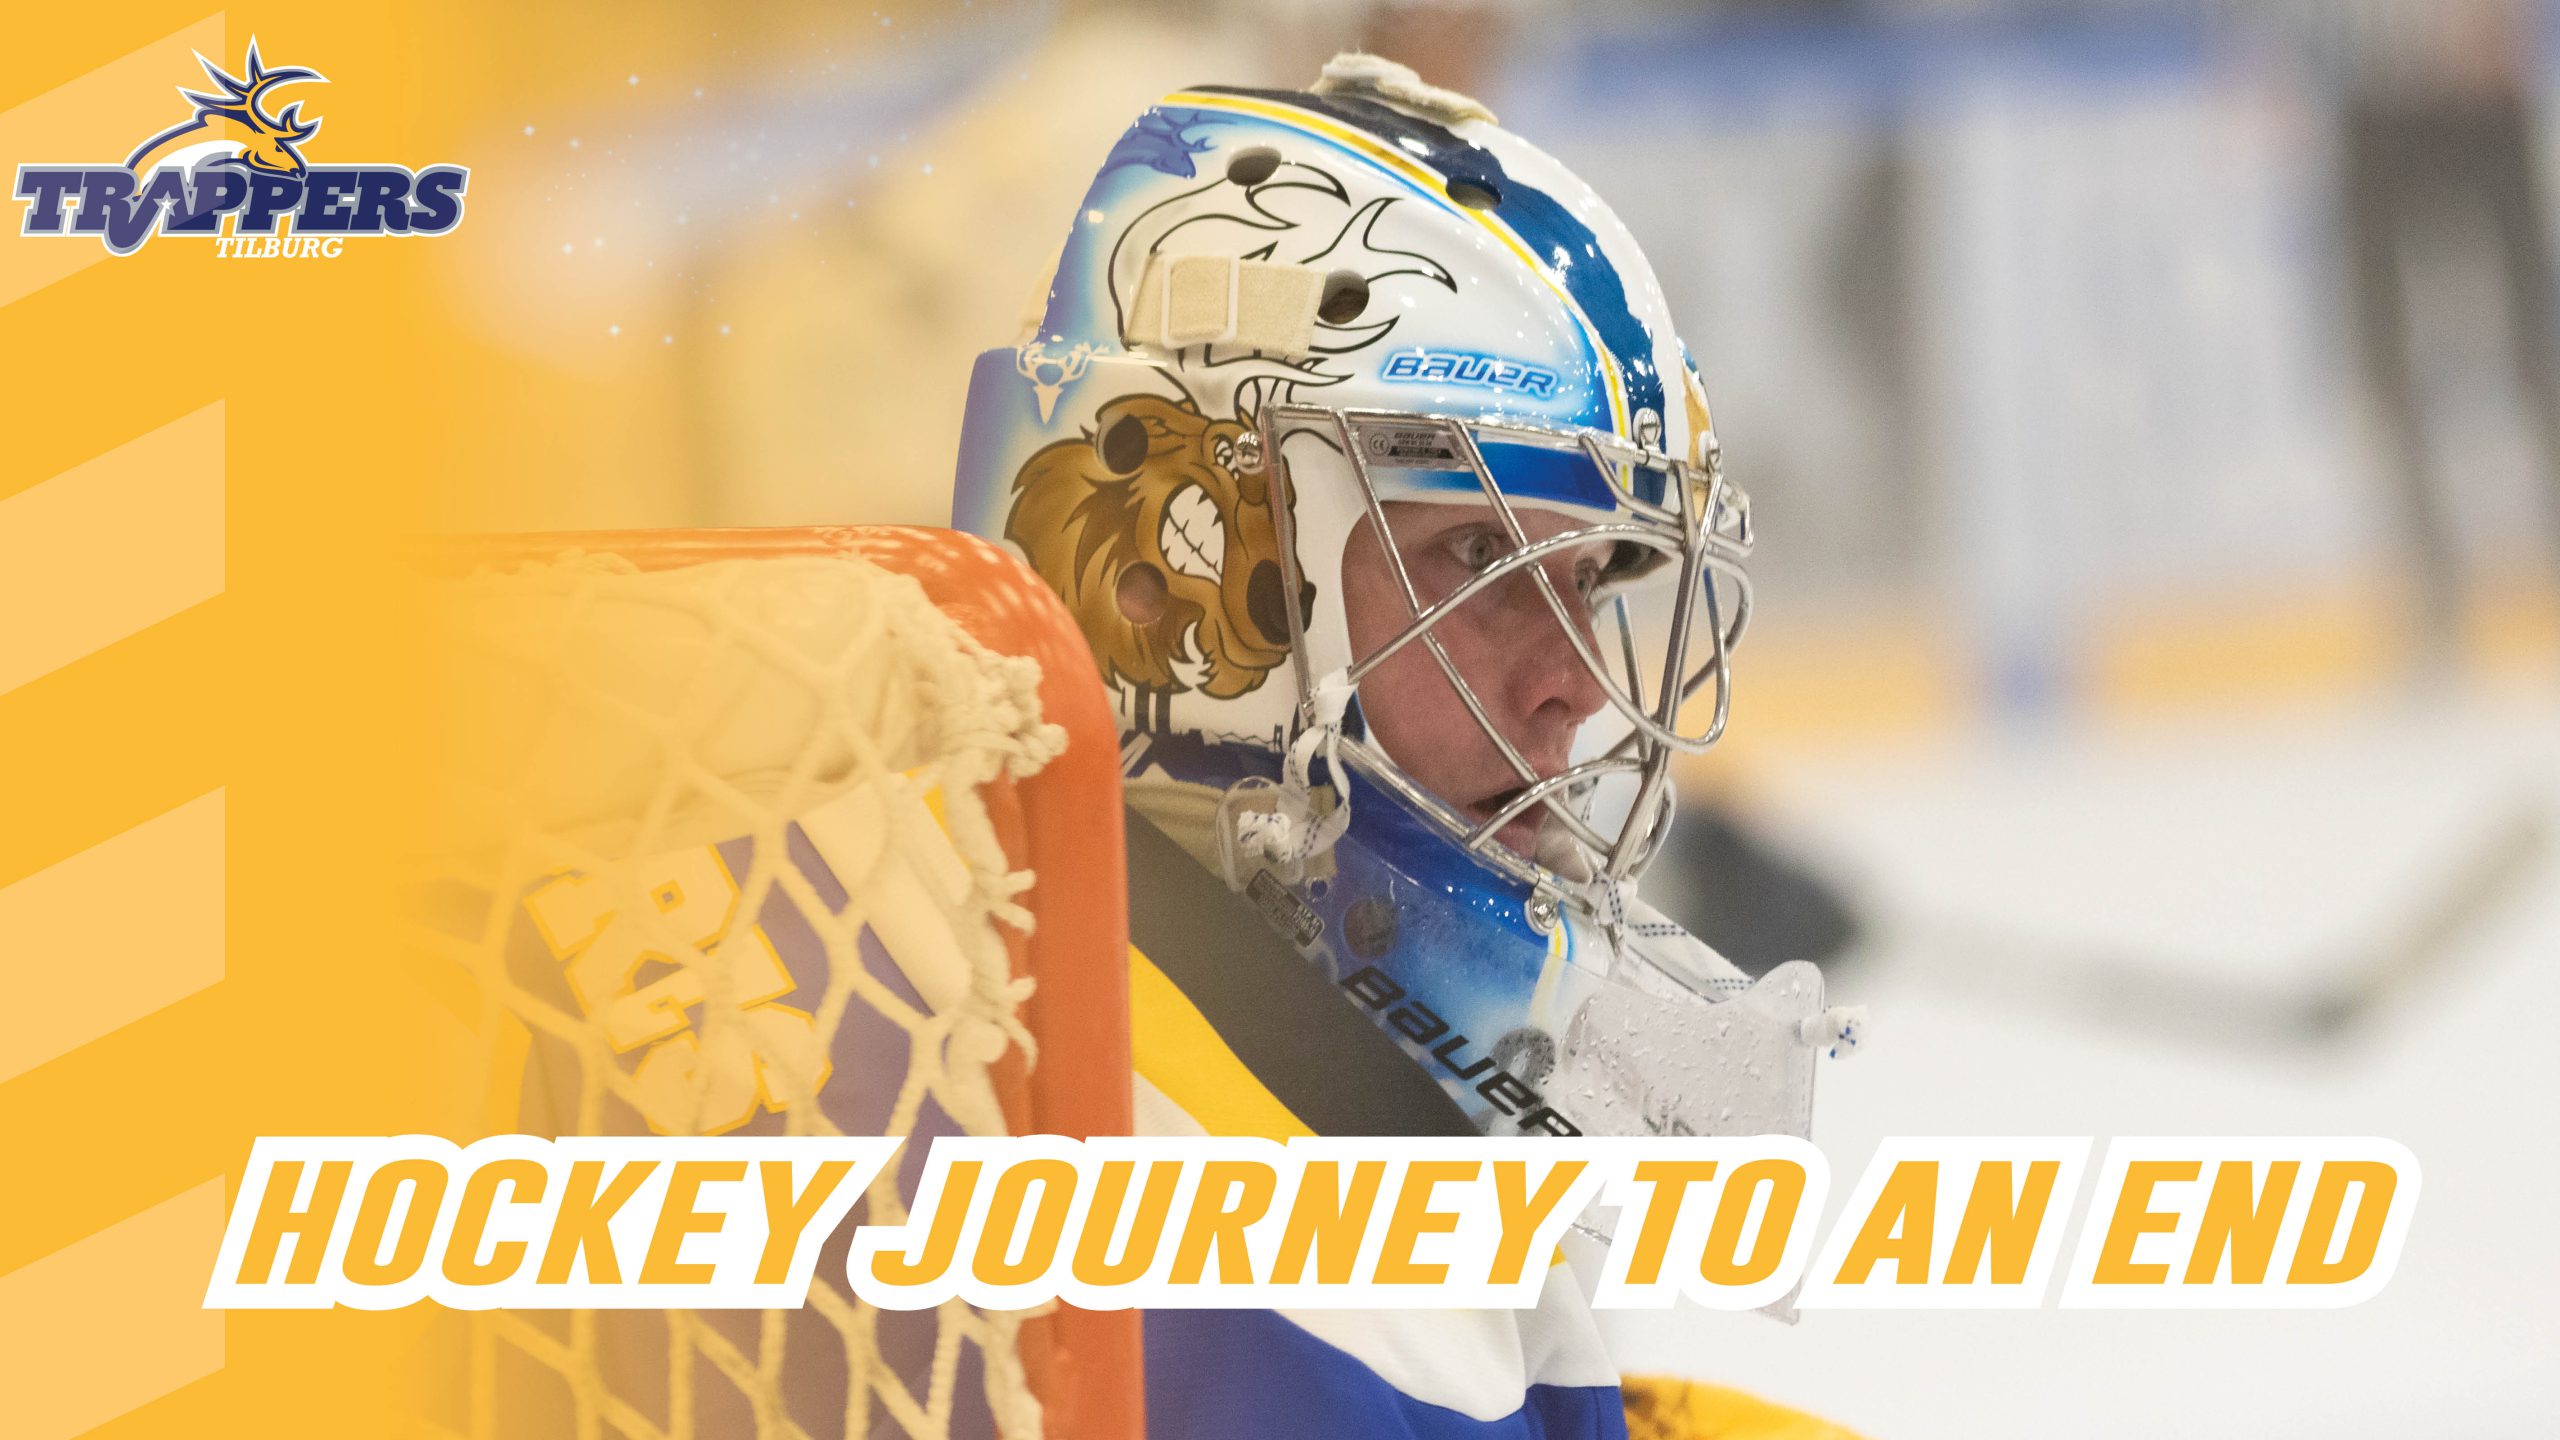 Hockey journey to an end